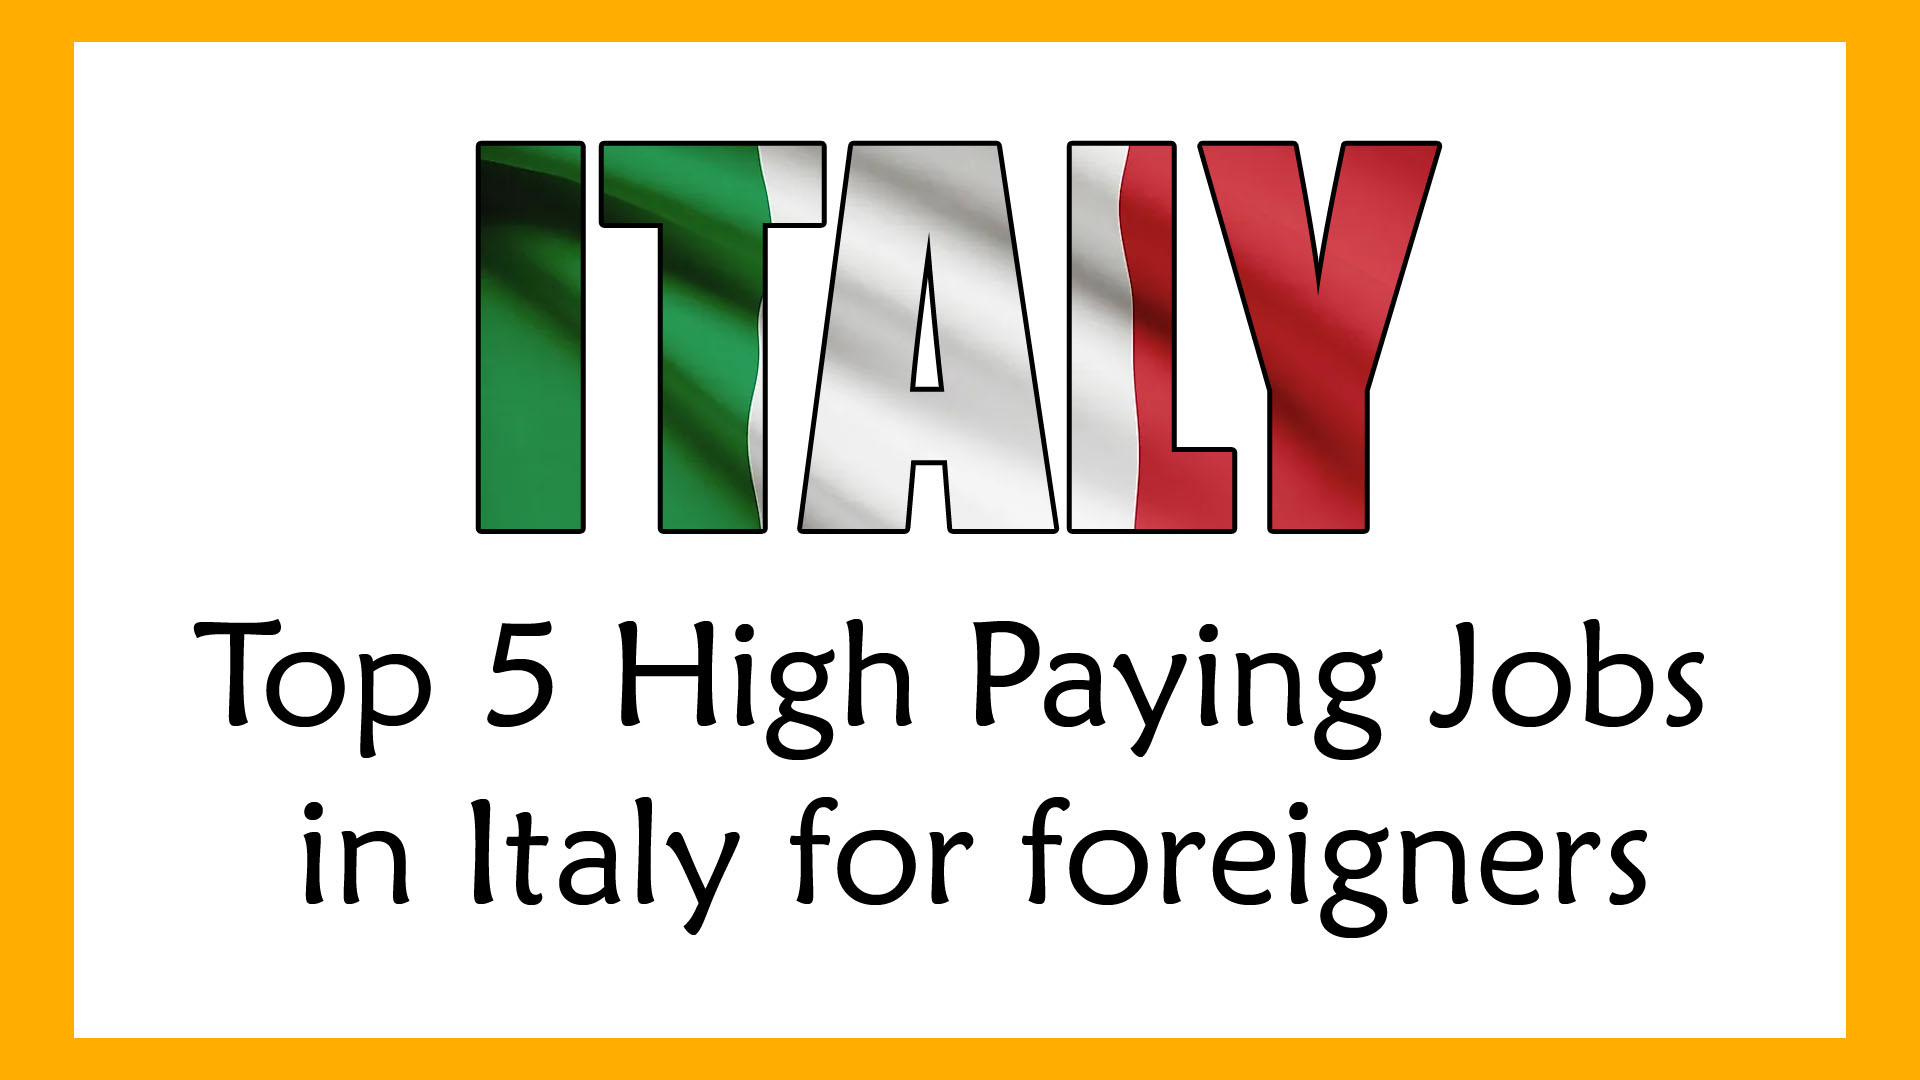 Top 5 High Paying Jobs in Italy for foreigners